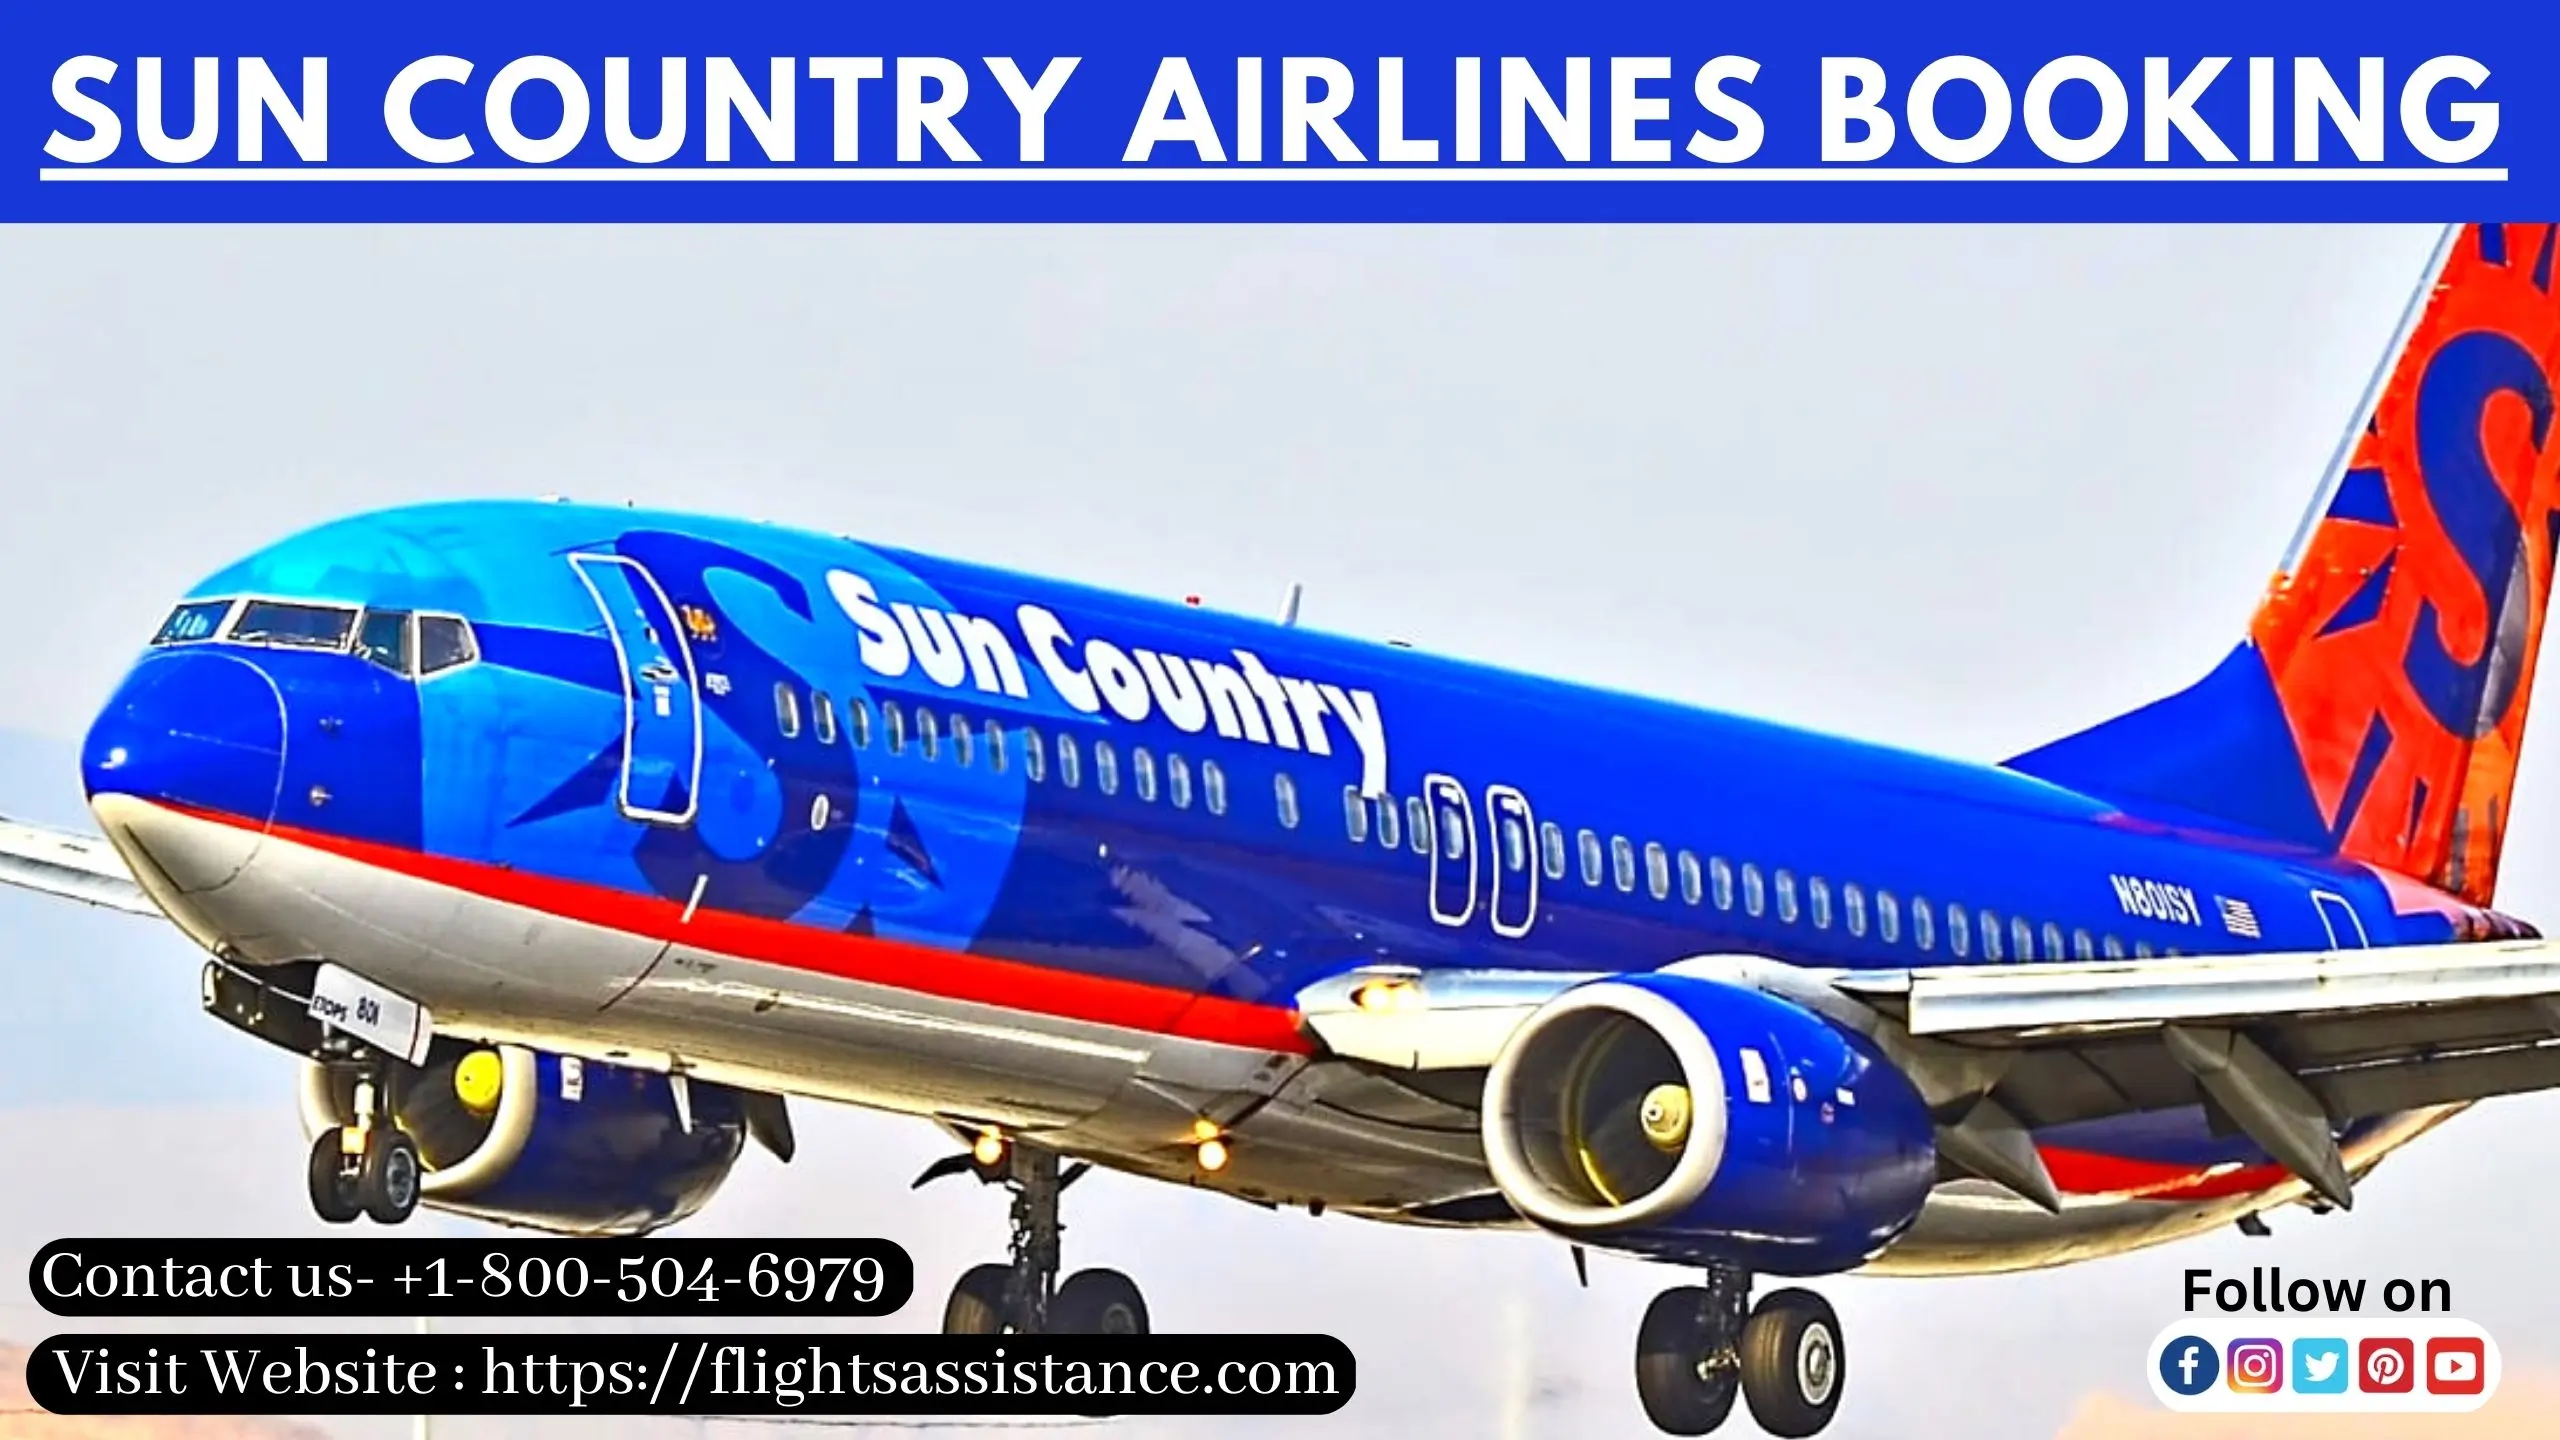 See? Sun Country 737-700 economy is better than you think it is